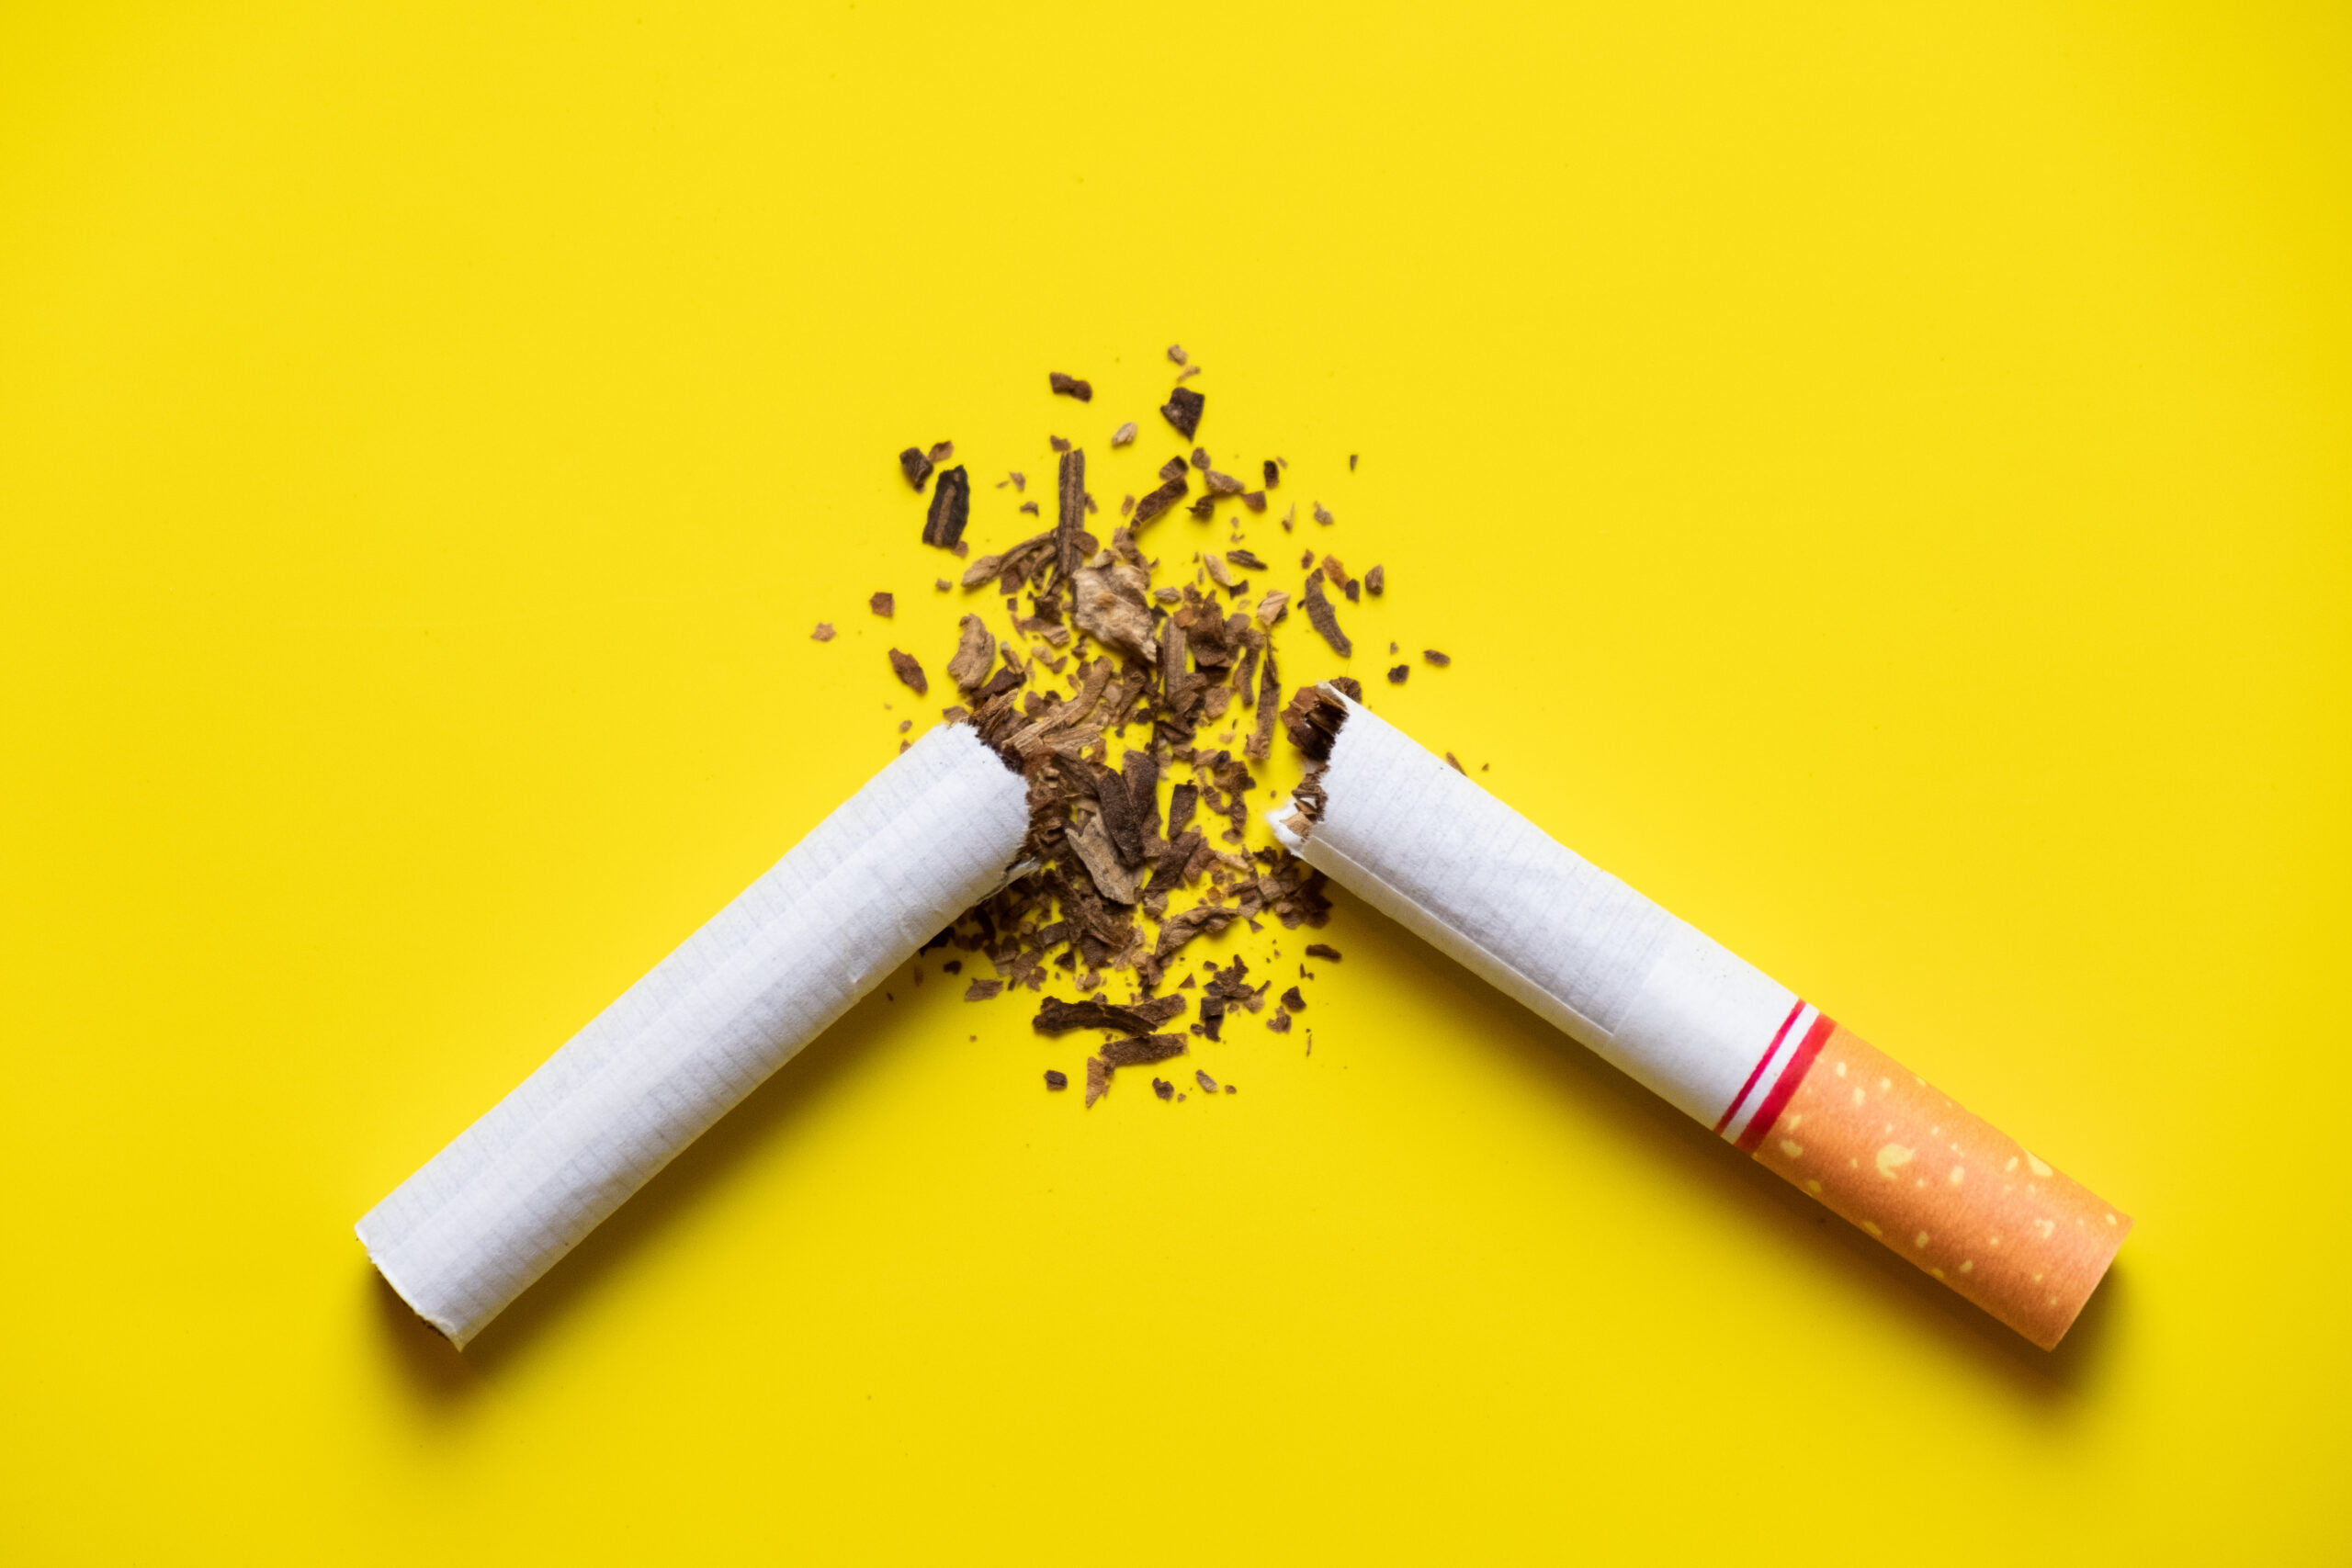 A broken cigarette on a yellow background